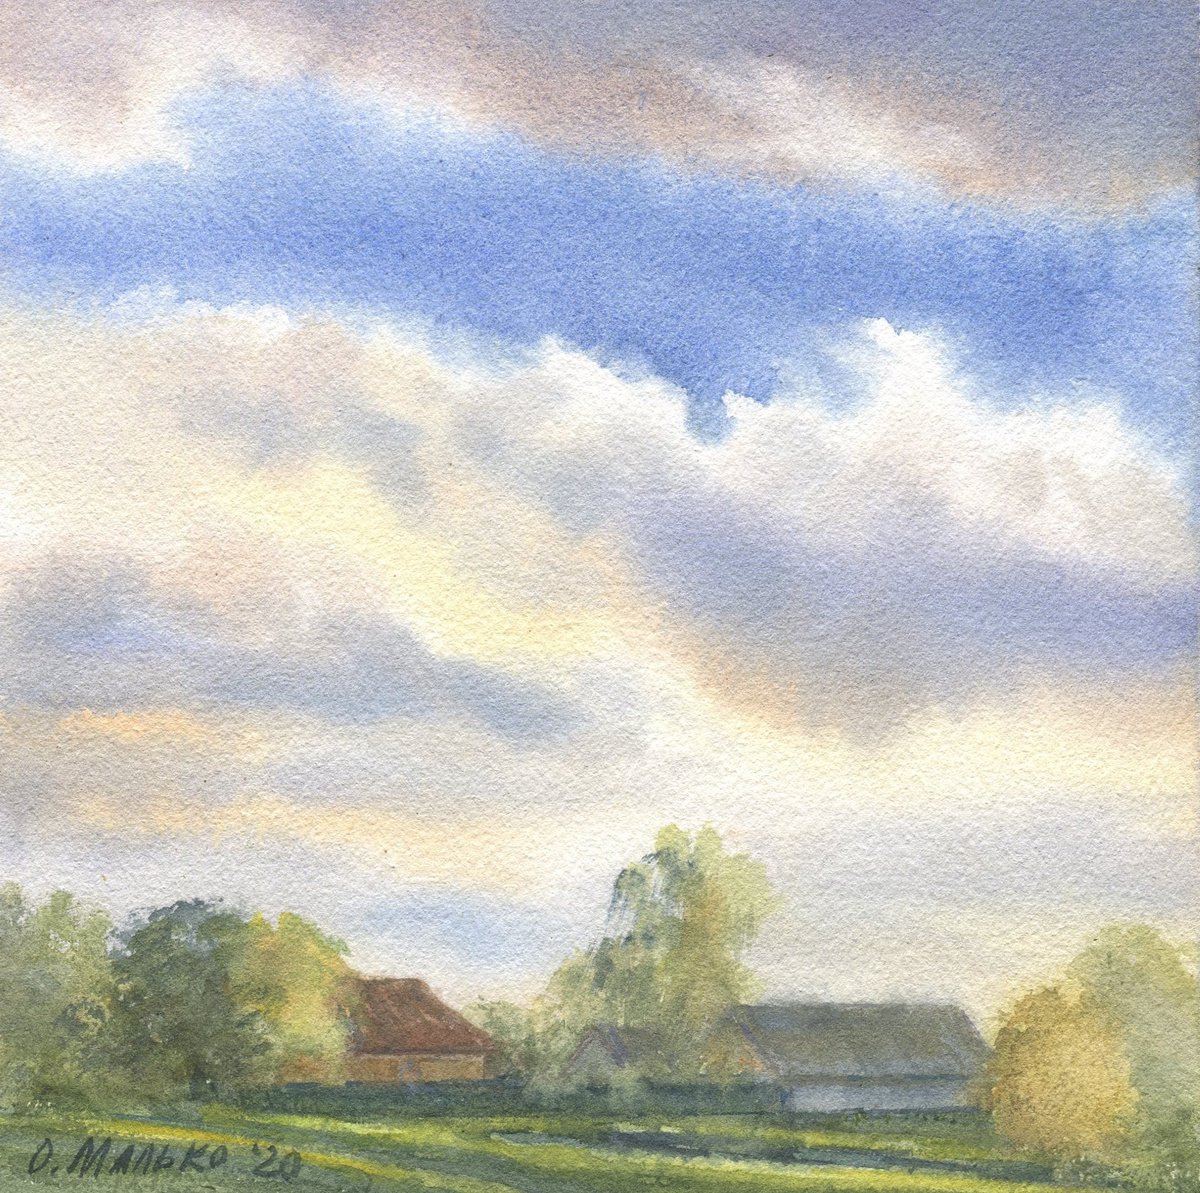 Sky 14. Floating clouds / Rural scene Original watercolor Summer picture by Olha Malko